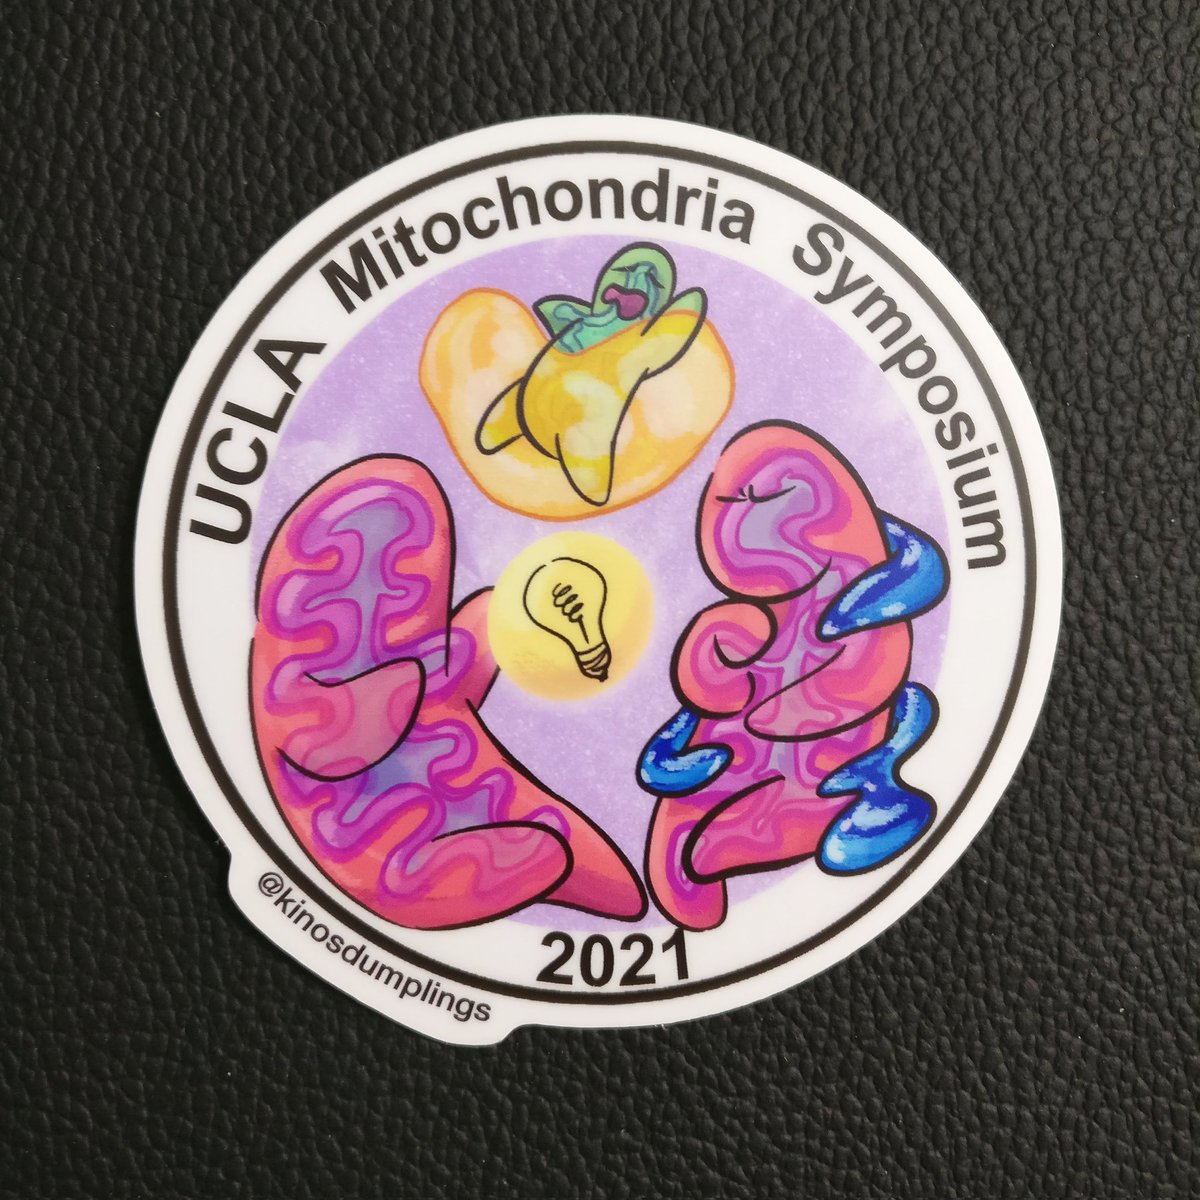 These guys are making their debut at the UCLA #Mitochondria Symposium in December 9-11, 2021! 

uclamitosymposium.com

Can you pick out mitophagy and interorganelle interactions in this sticker?

#scientificillustrator #scicomm